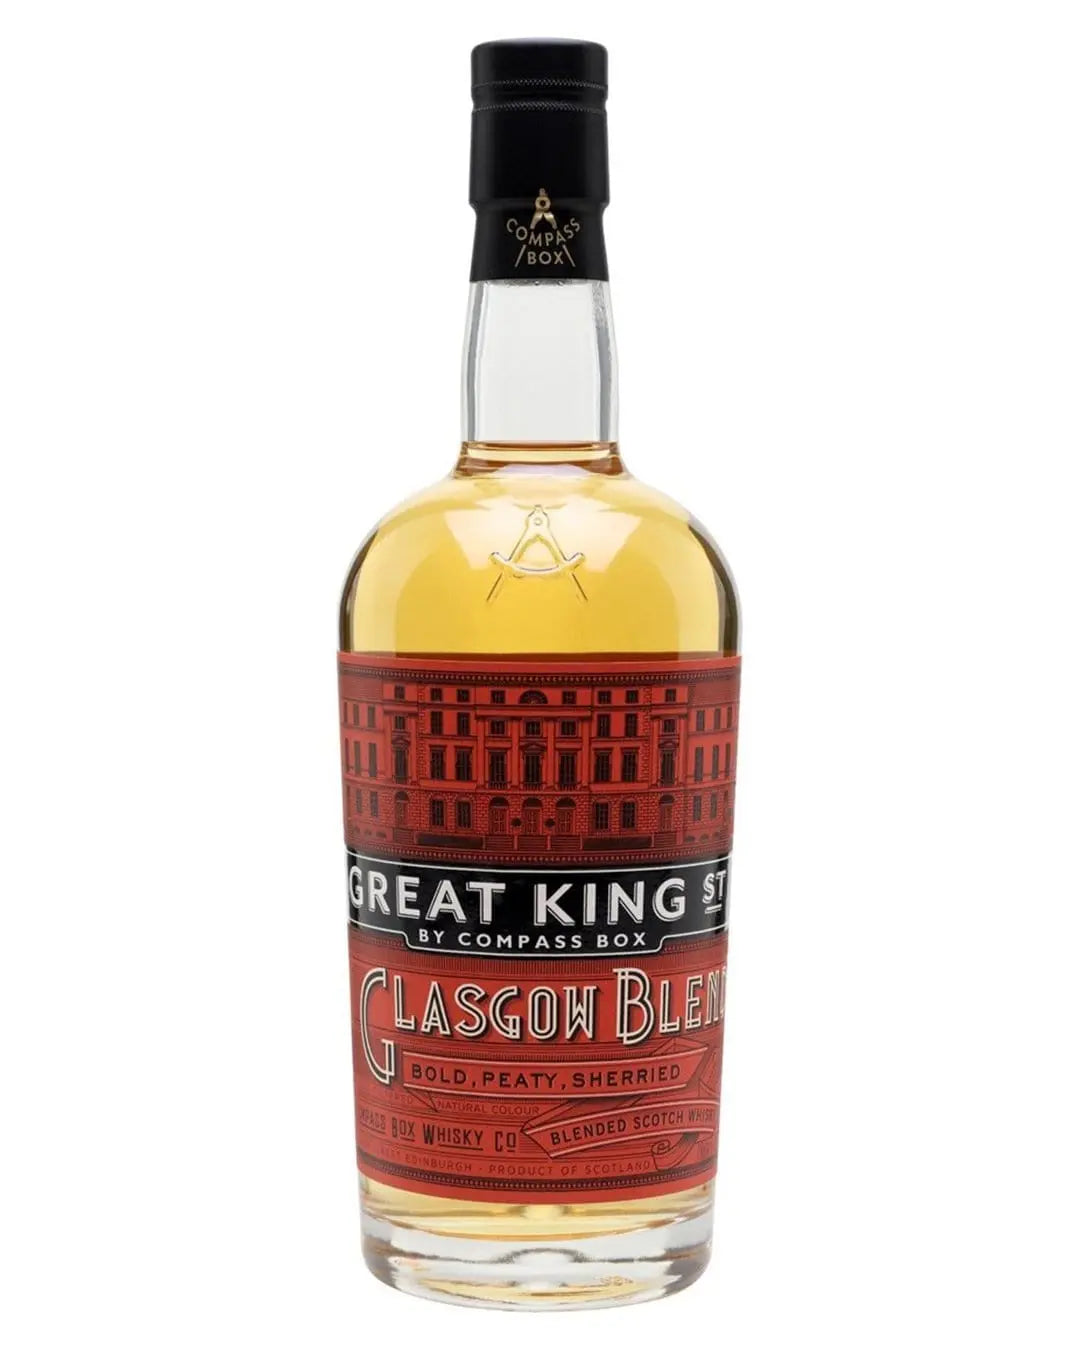 Compass Box Glasgow Blend - Great King Street, 50 cl Whisky 5065000482879